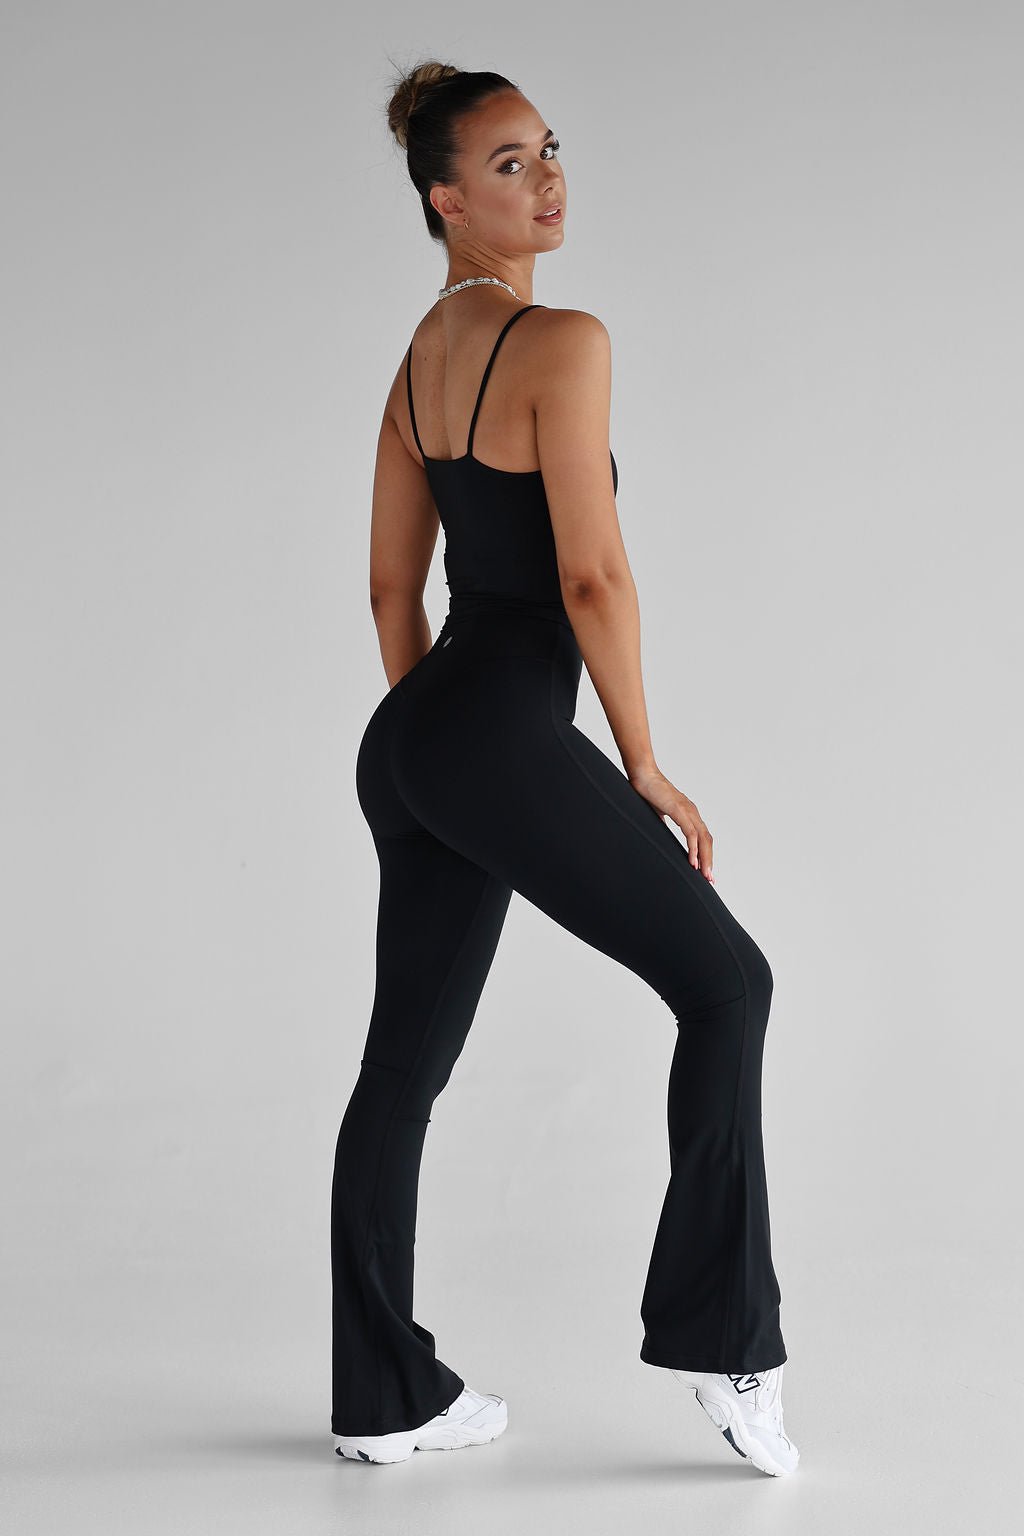 SCULPT Flare Leggings - Dark Chocolate, High Waisted, Squat Proof, 5 Star  Rated